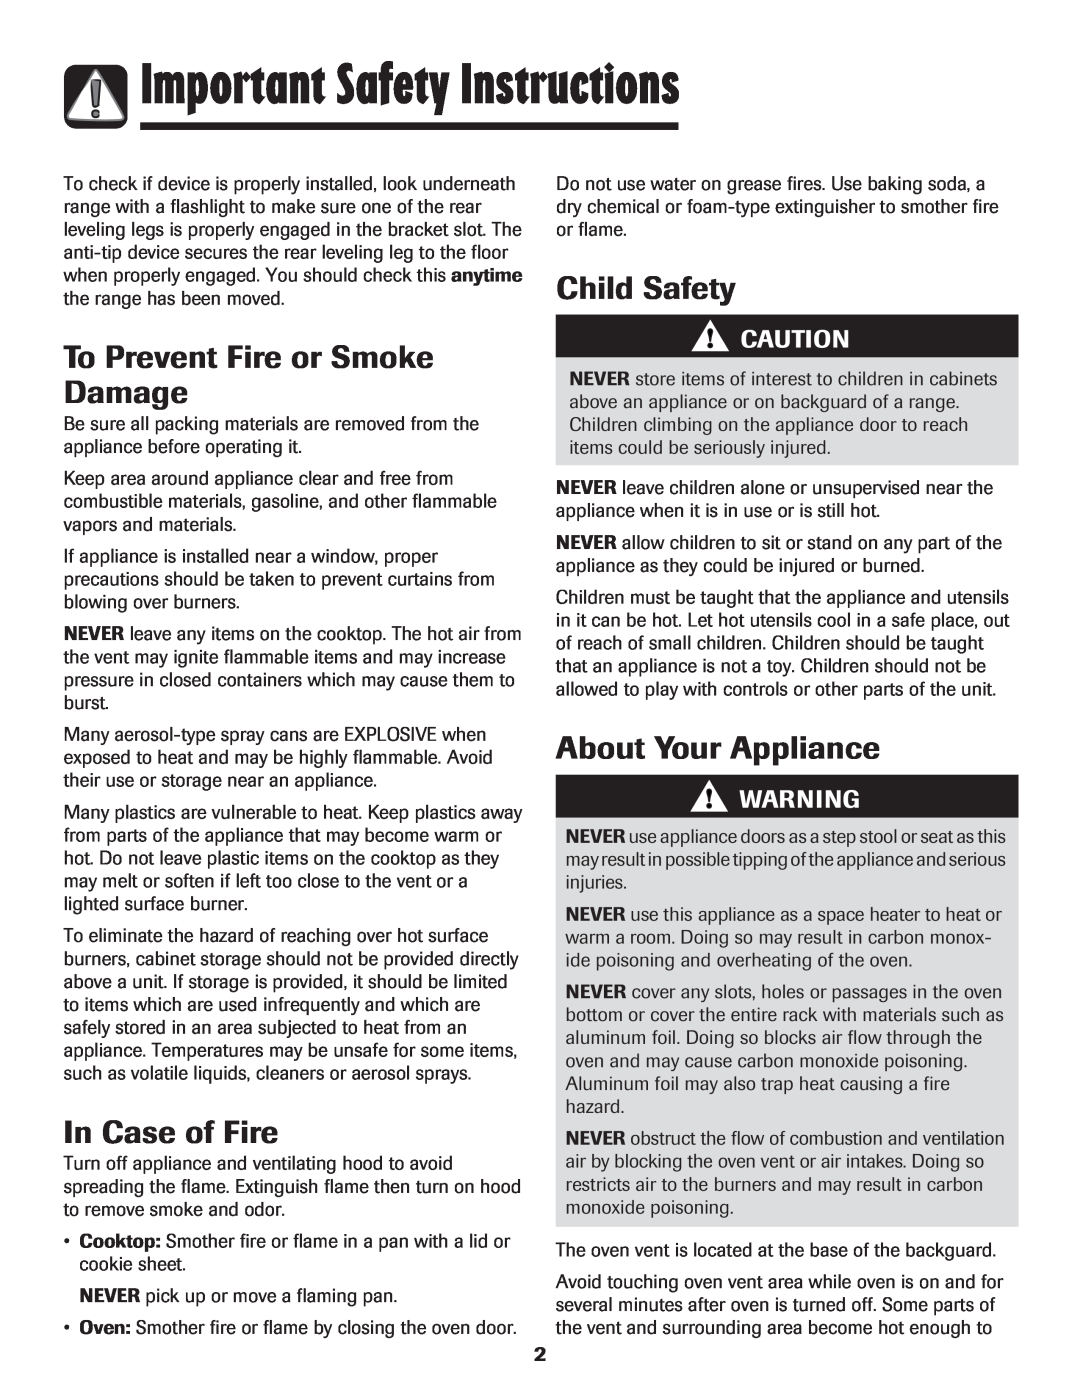 Amana pmn Important Safety Instructions, To Prevent Fire or Smoke Damage, In Case of Fire, Child Safety 